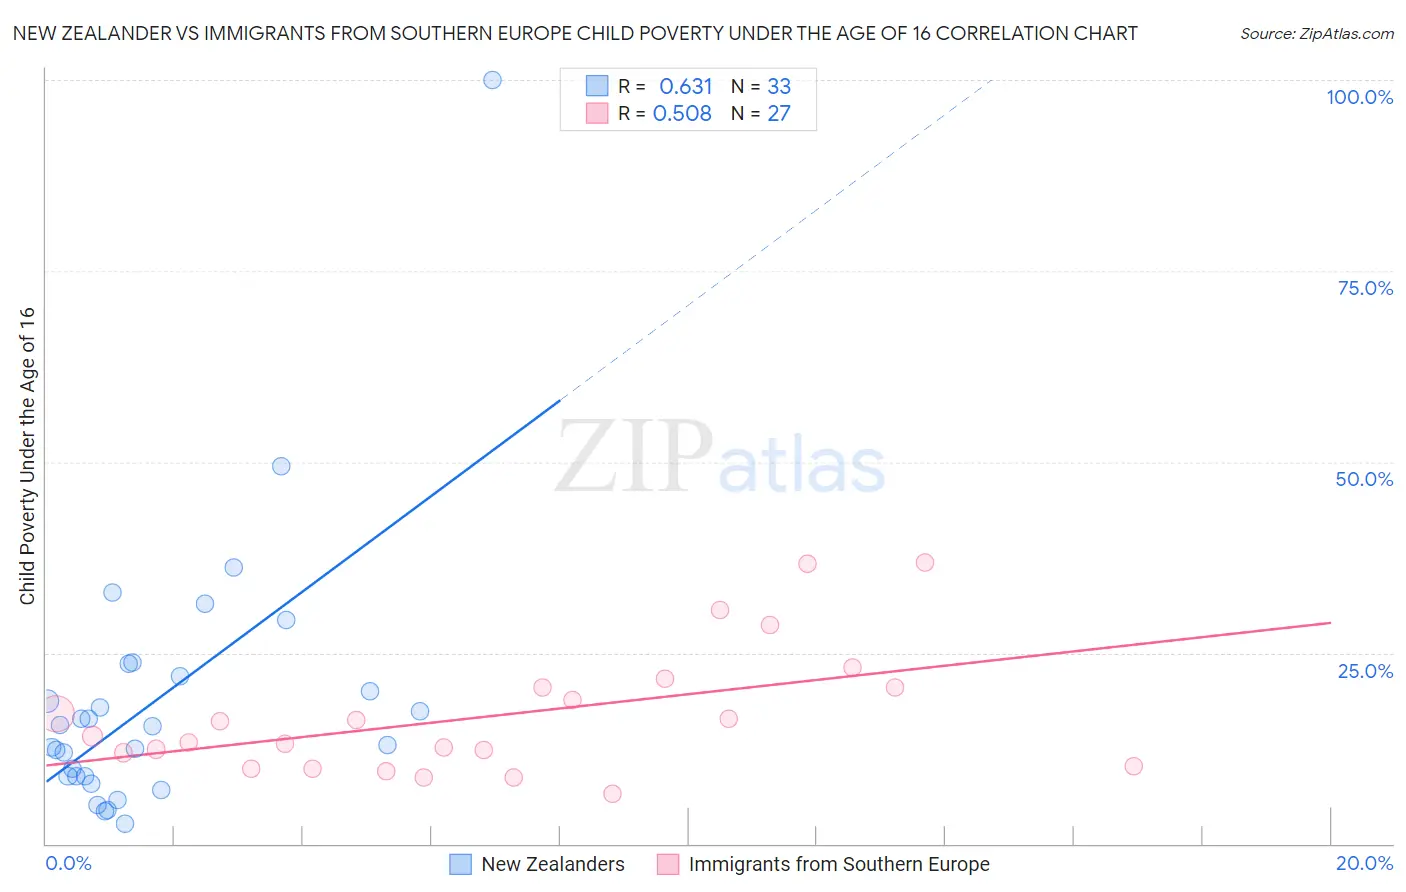 New Zealander vs Immigrants from Southern Europe Child Poverty Under the Age of 16